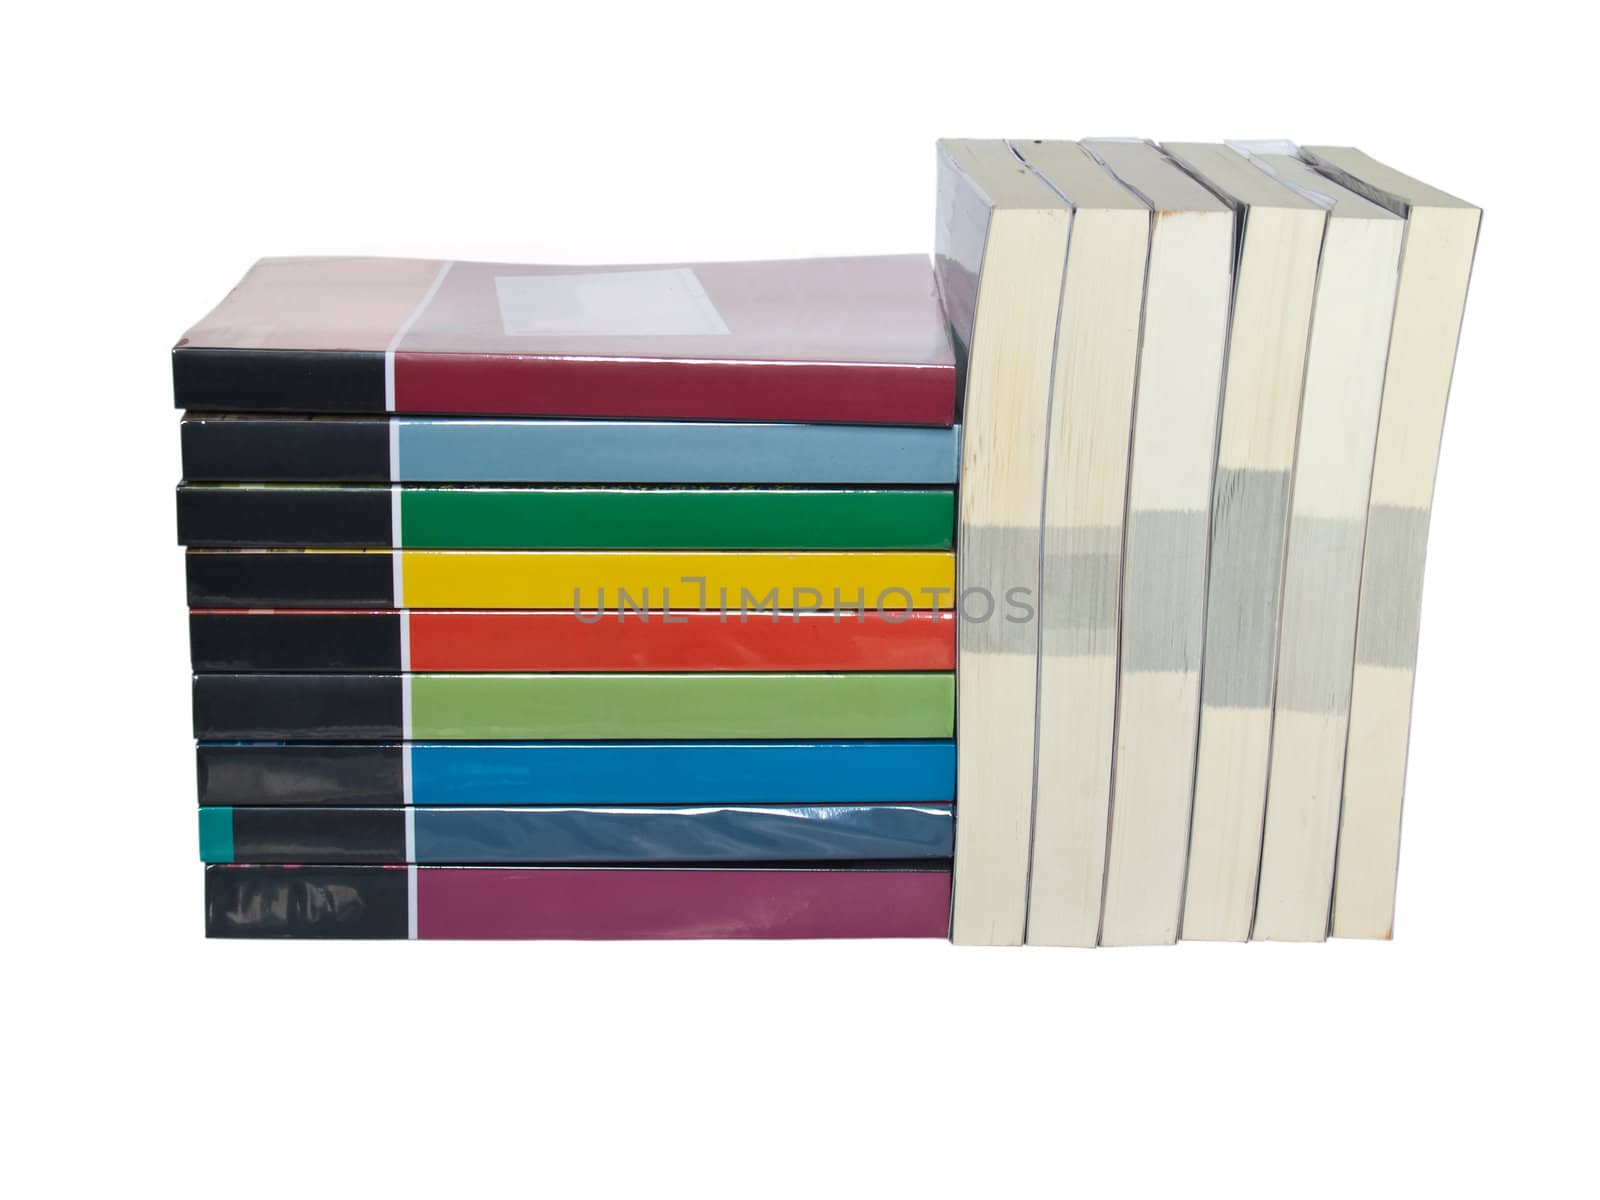 Isolated stacks of colorful real books on white background